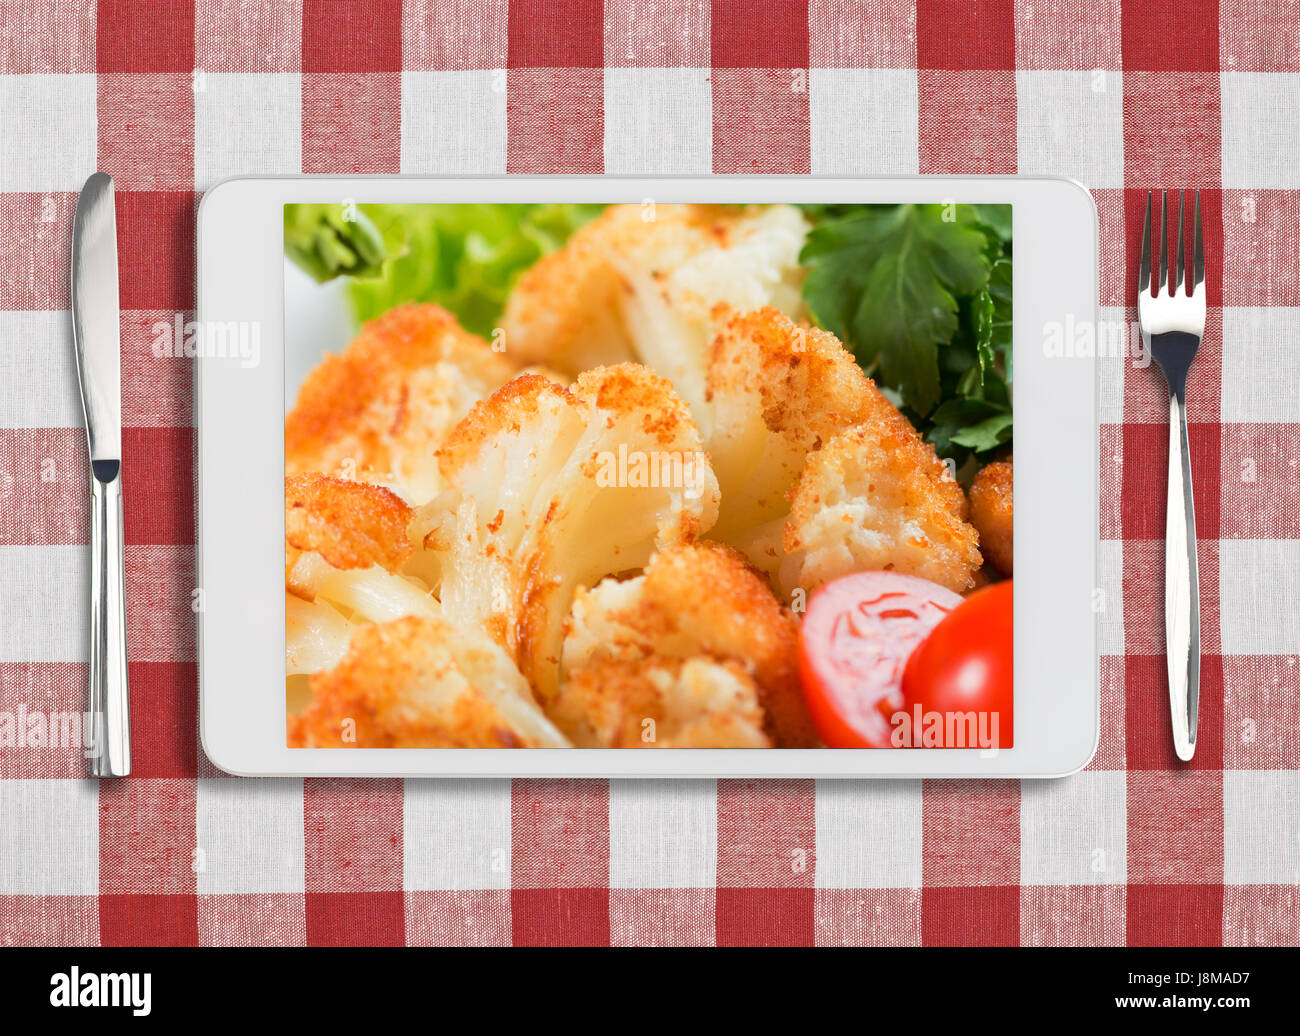 tablet pc with dish, fork and knife on red checked tablecloth Stock Photo